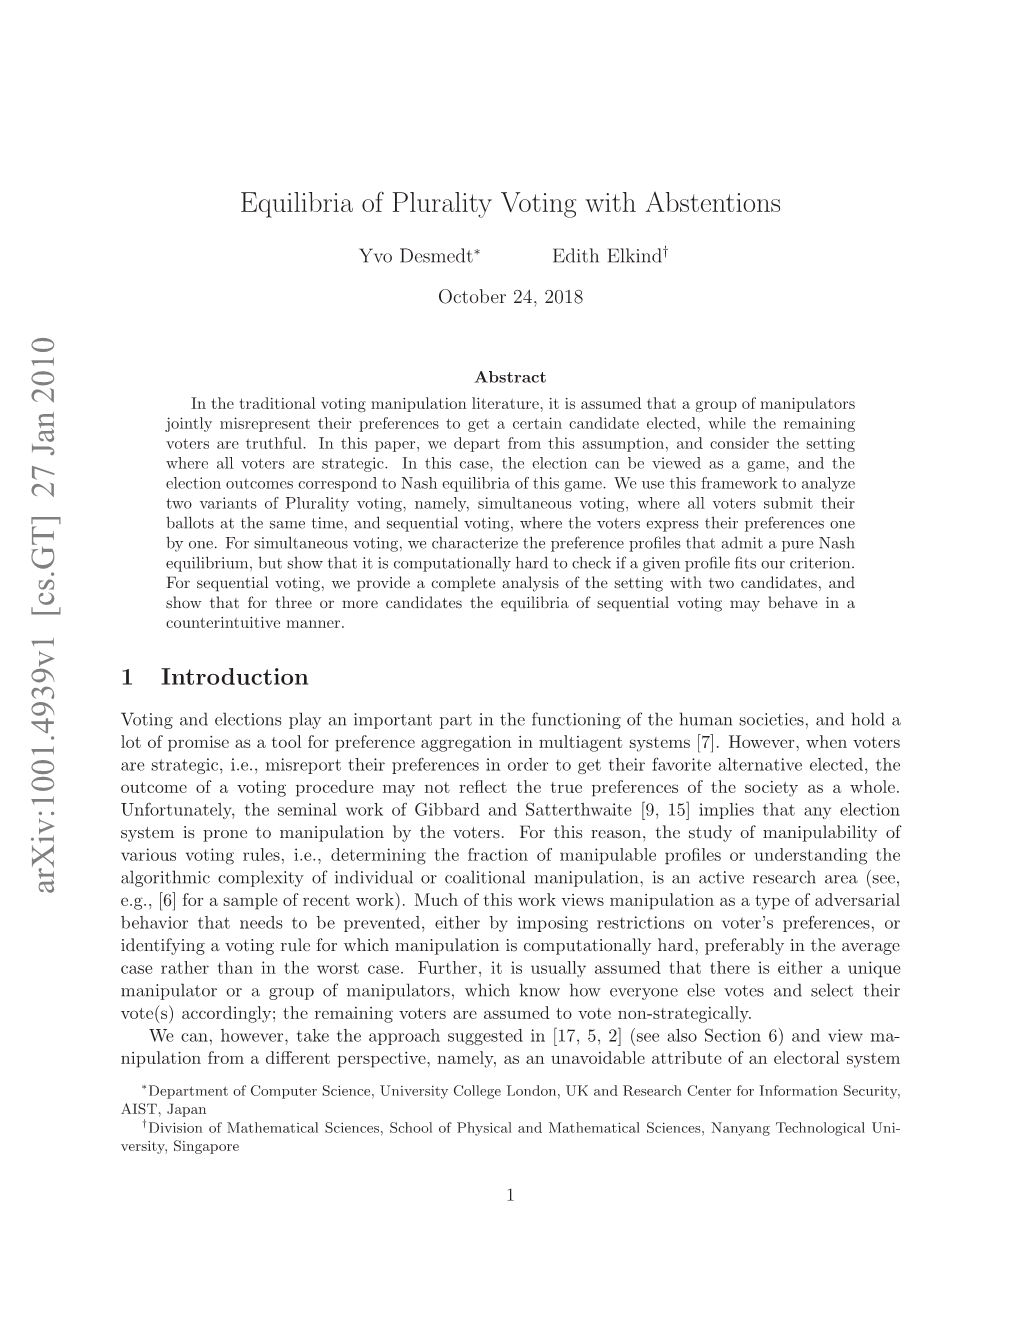 Equilibria of Plurality Voting with Abstentions